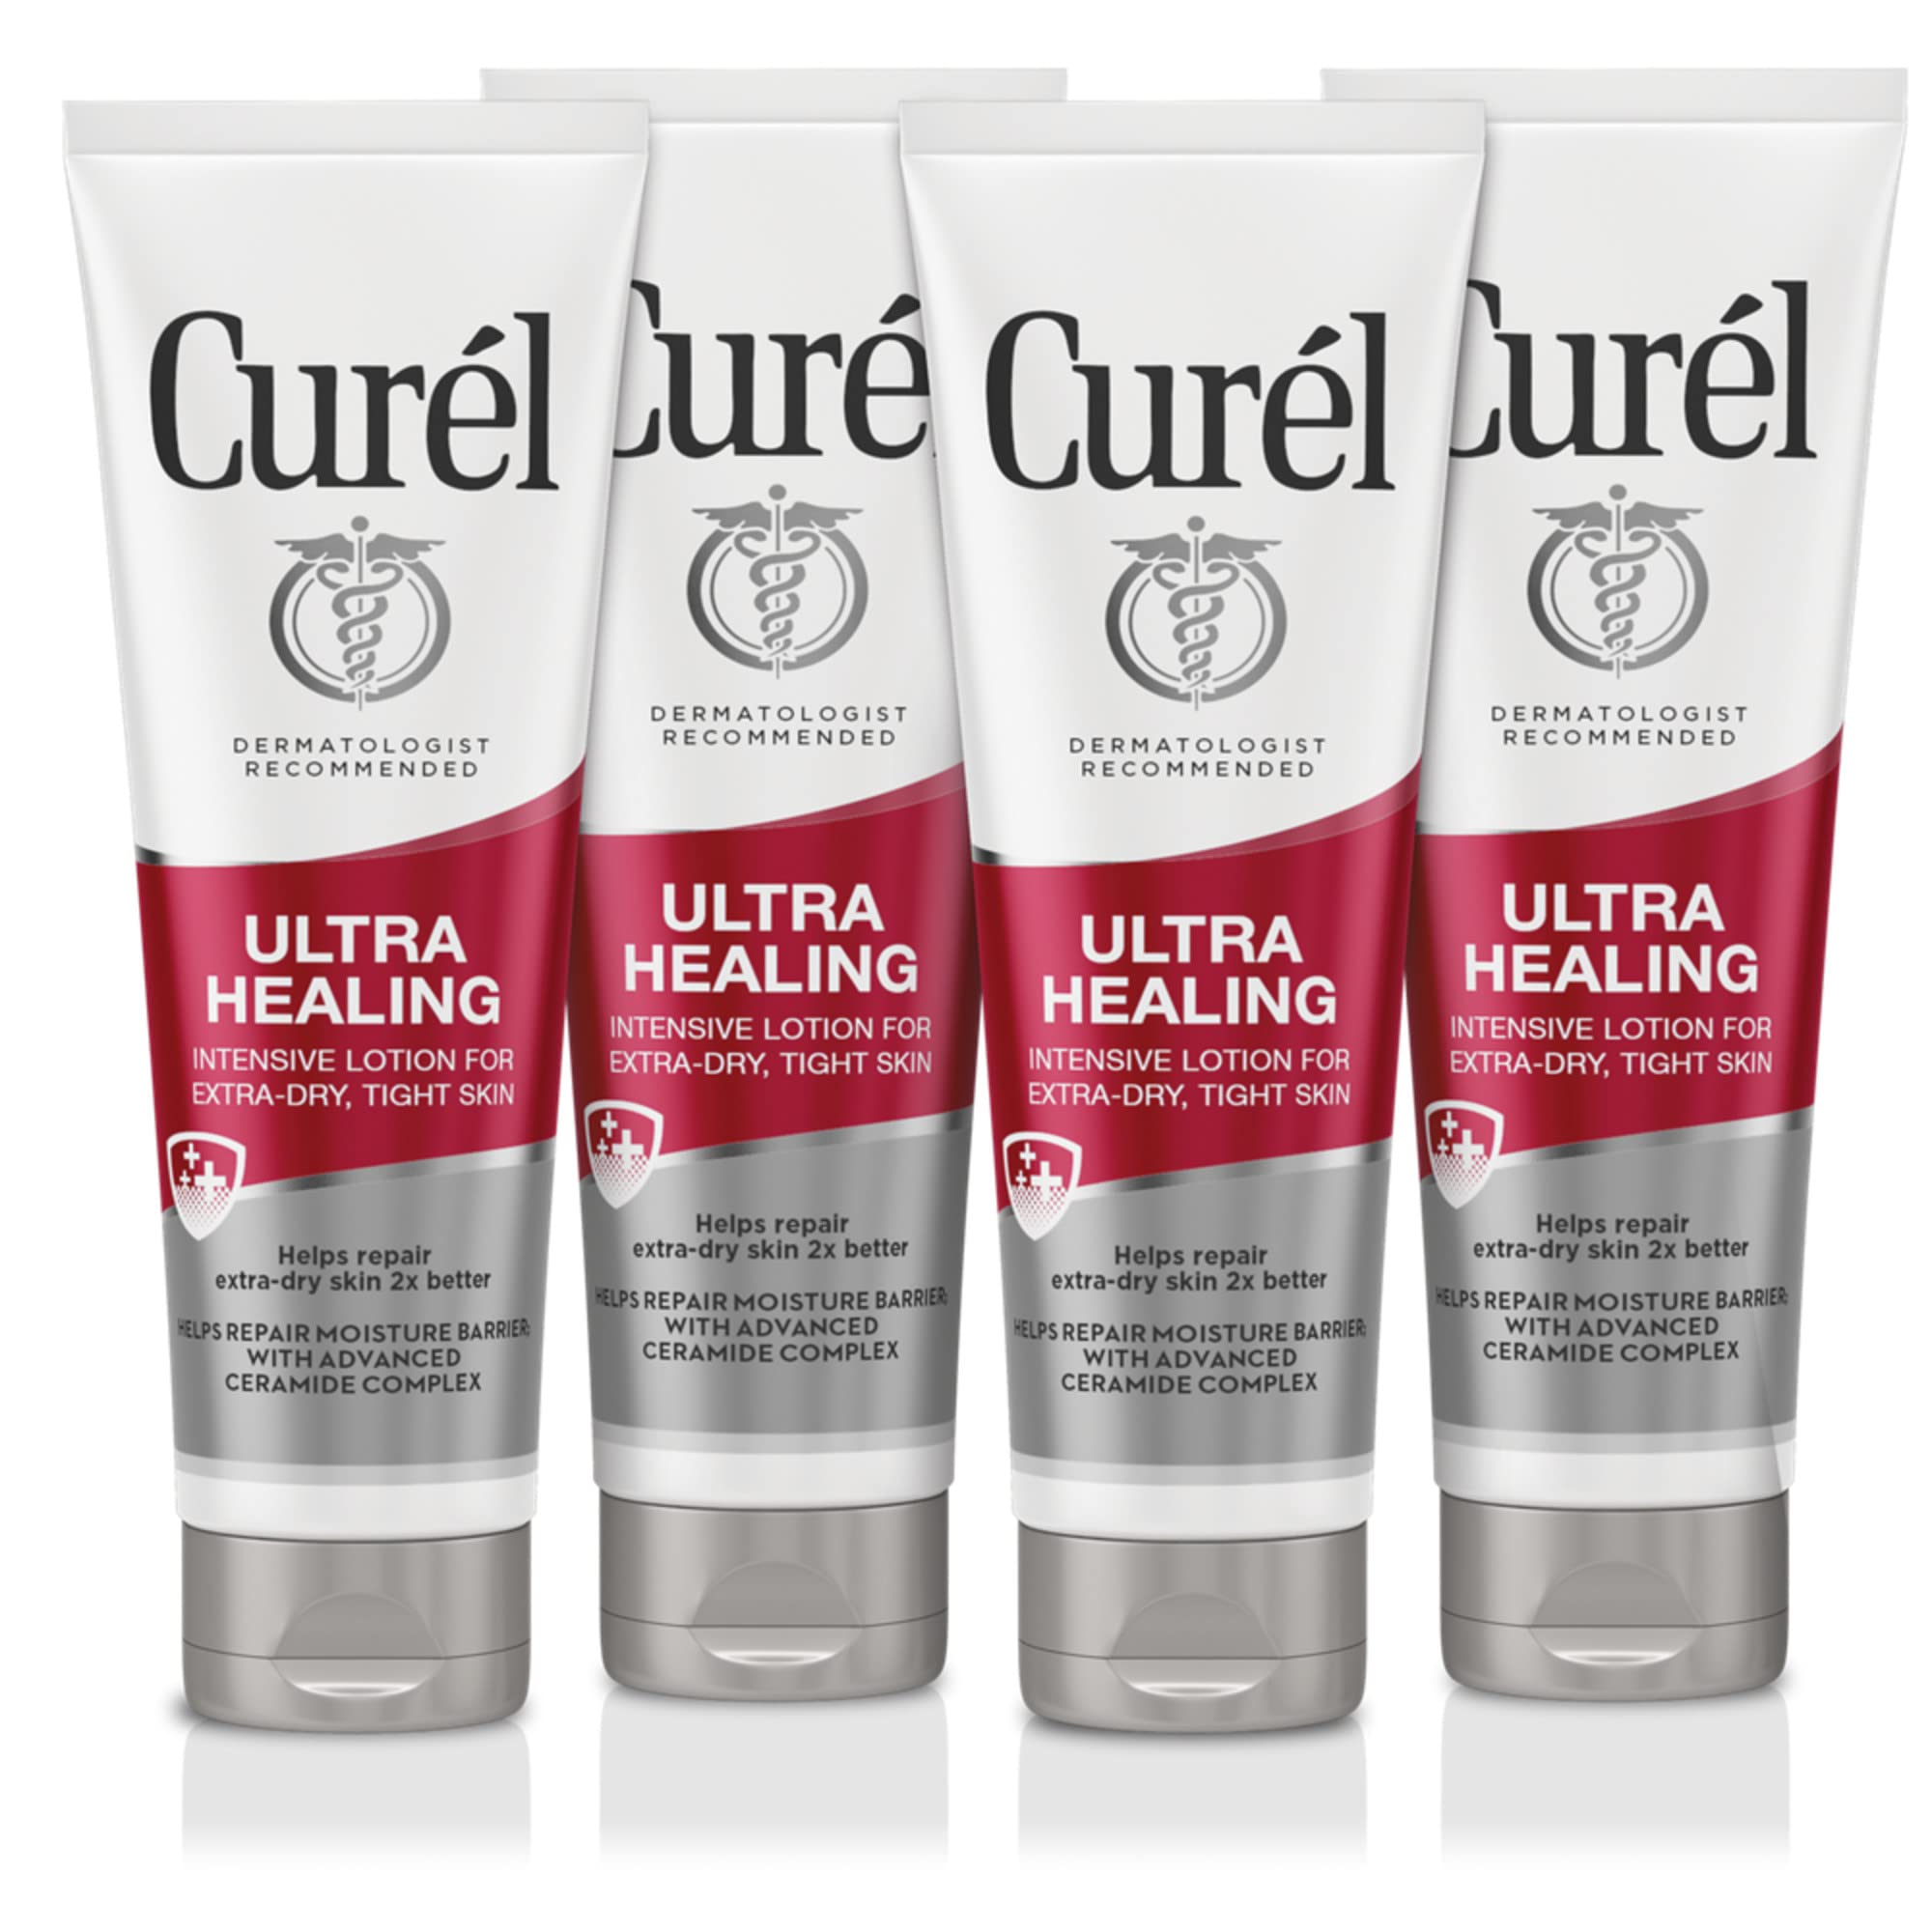 Curél Ultra Healing Body Lotion, Body and Hand Moisturizer for Extra-Dry, Tight Skin, with Advanced Ceramide Complex and Hydrating Agents, 2.5 Fl Oz (Pack of 4)